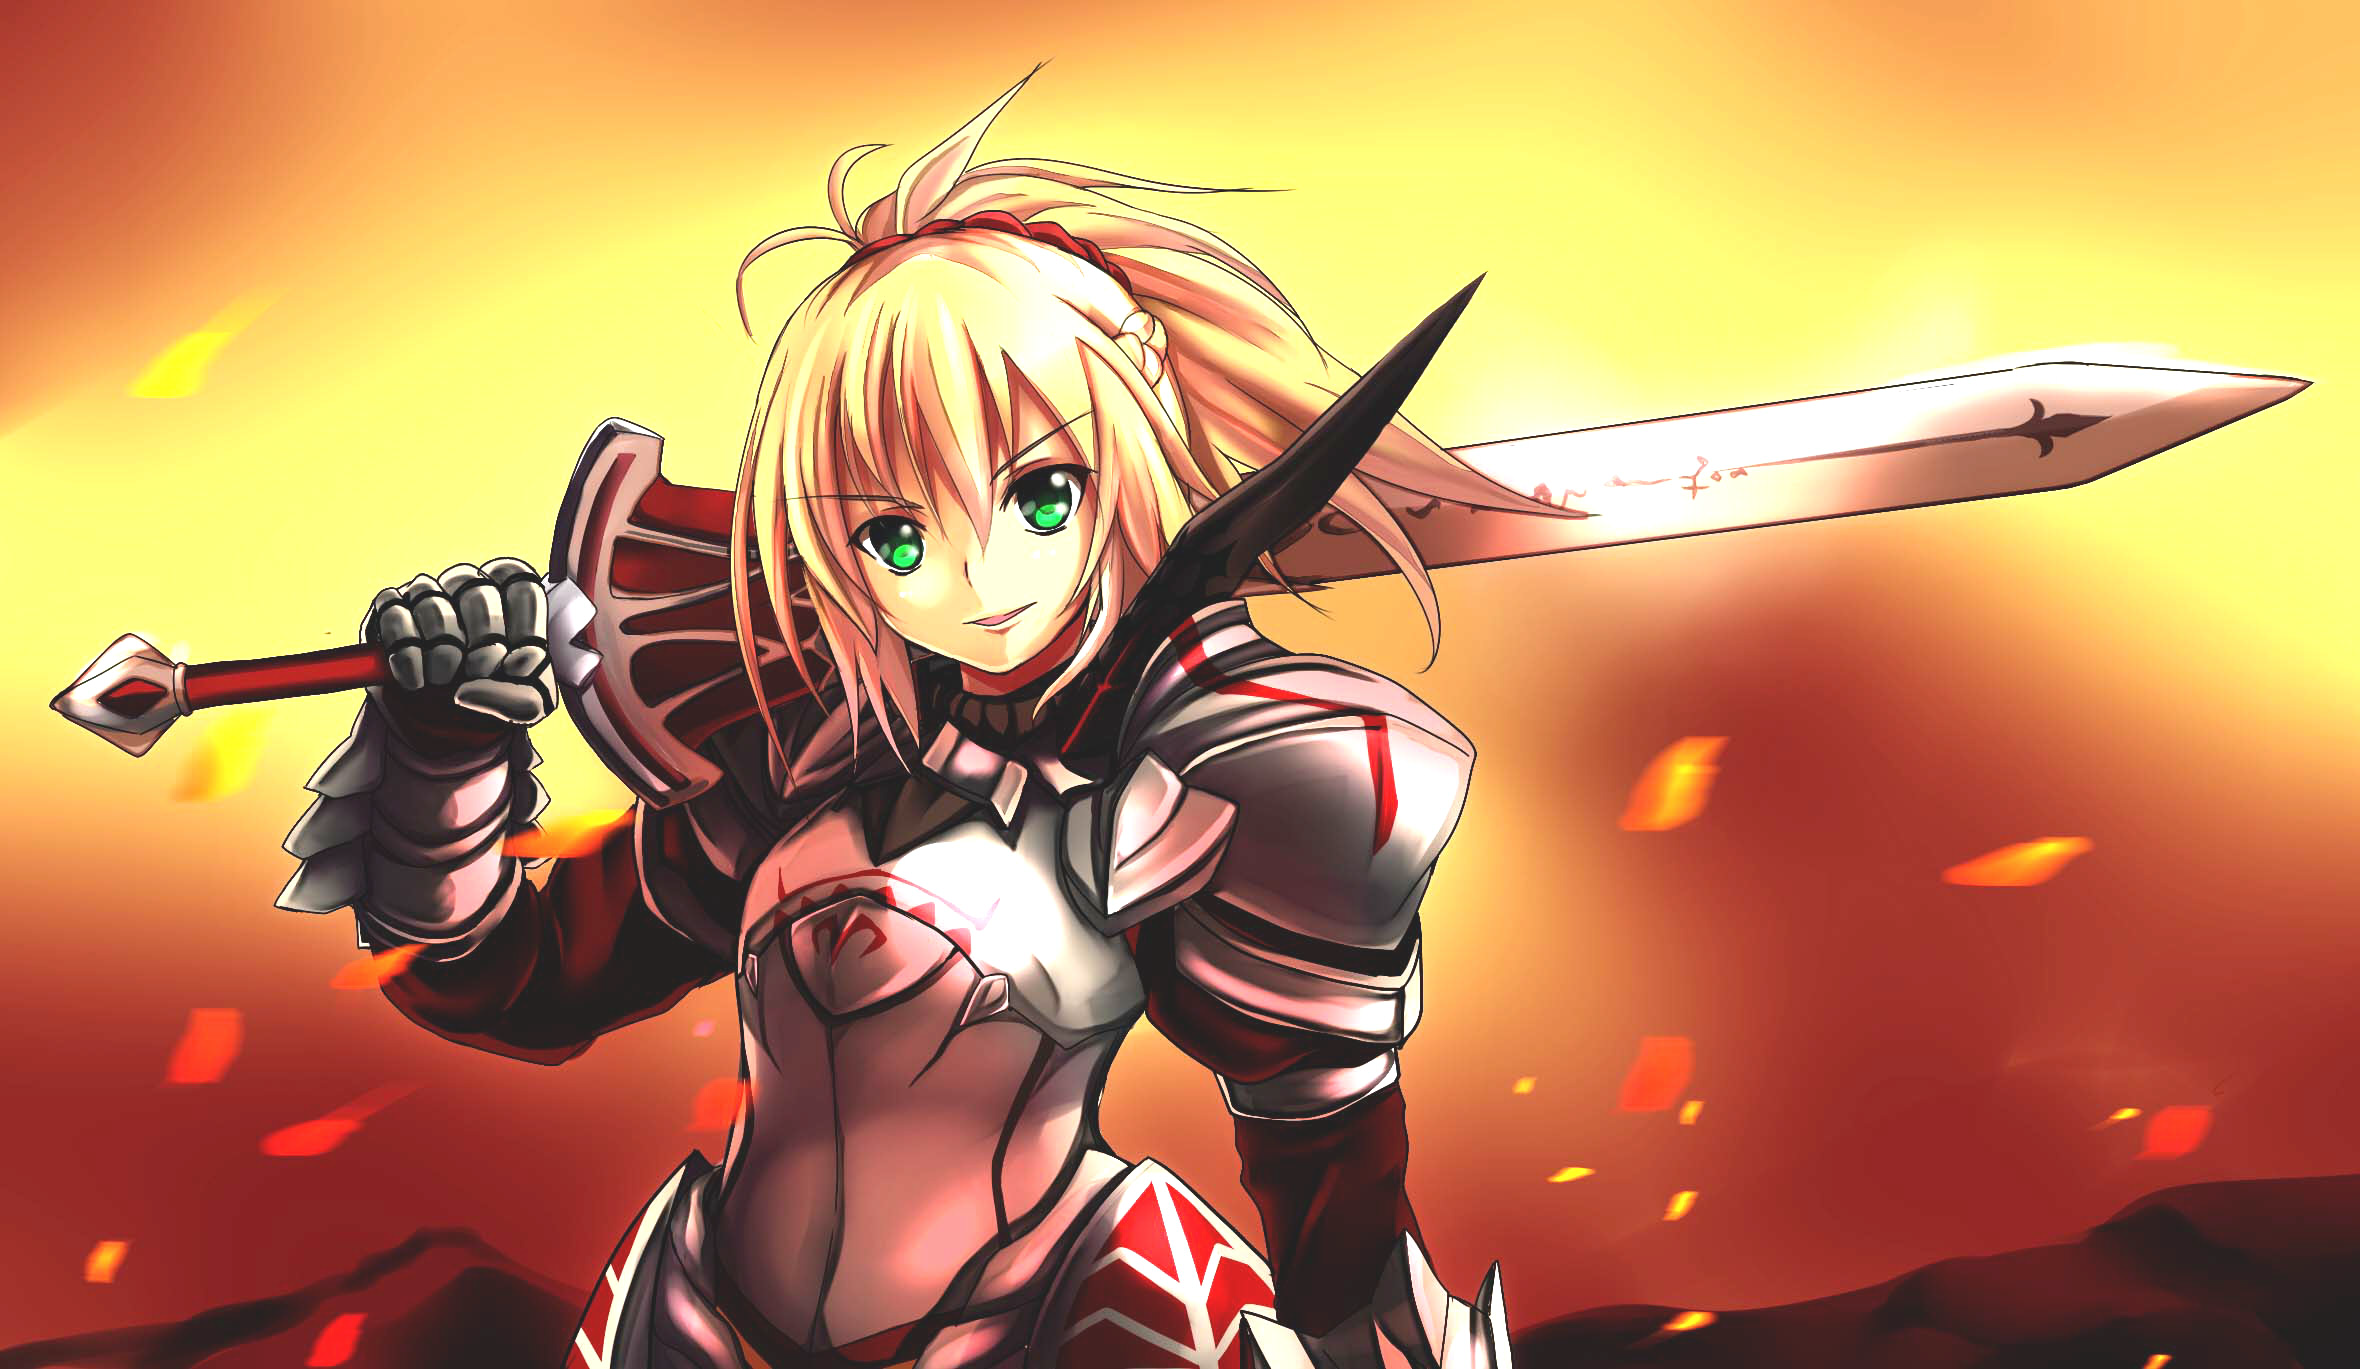 Mordred Fate Apocrypha Saber Of Red Fate Apocrypha 2360x1369